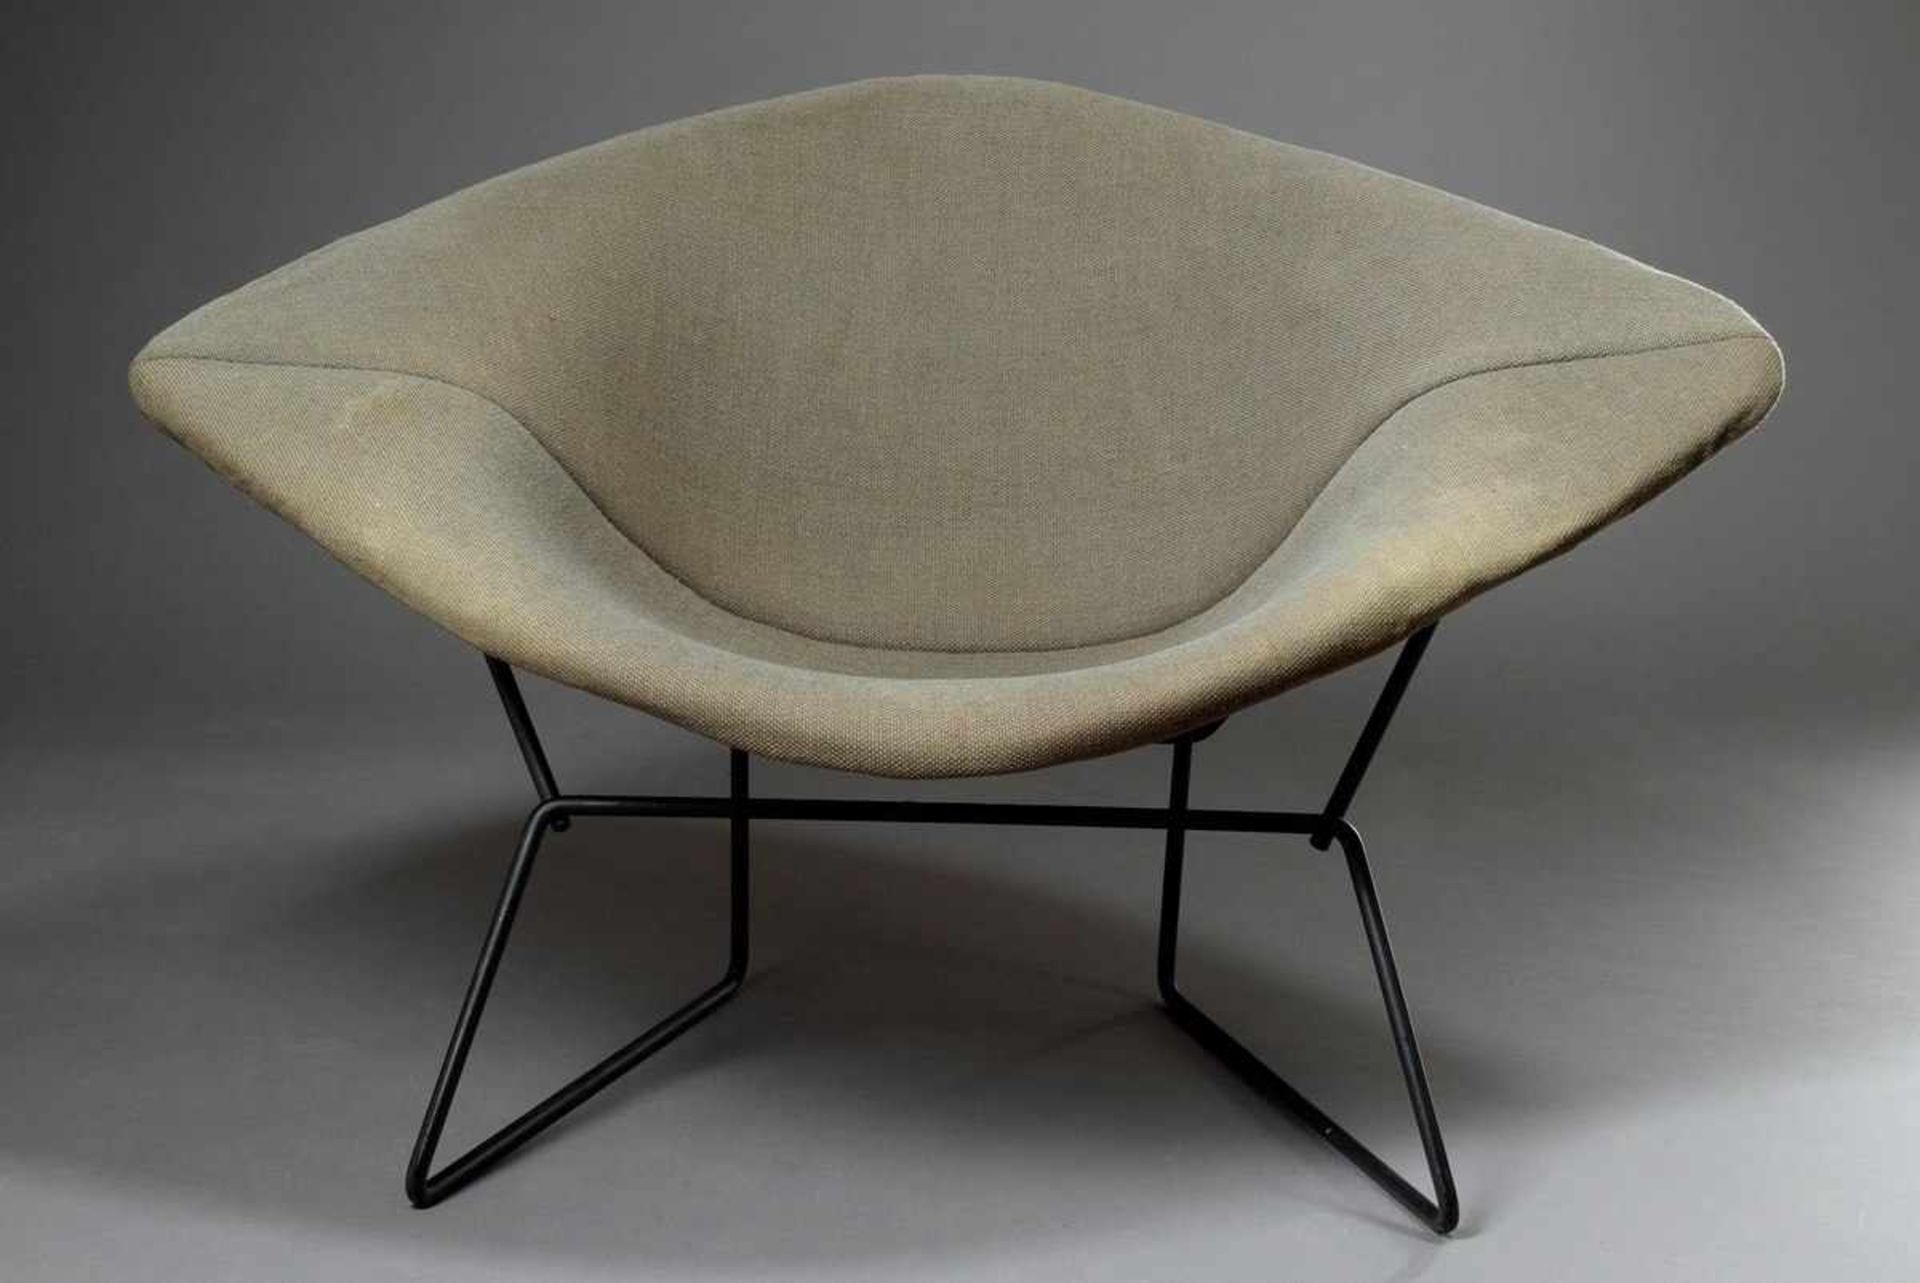 Diamond Chair with grey fabric cover, designed by Harry Bertoia, 35/68x110cm, slightly